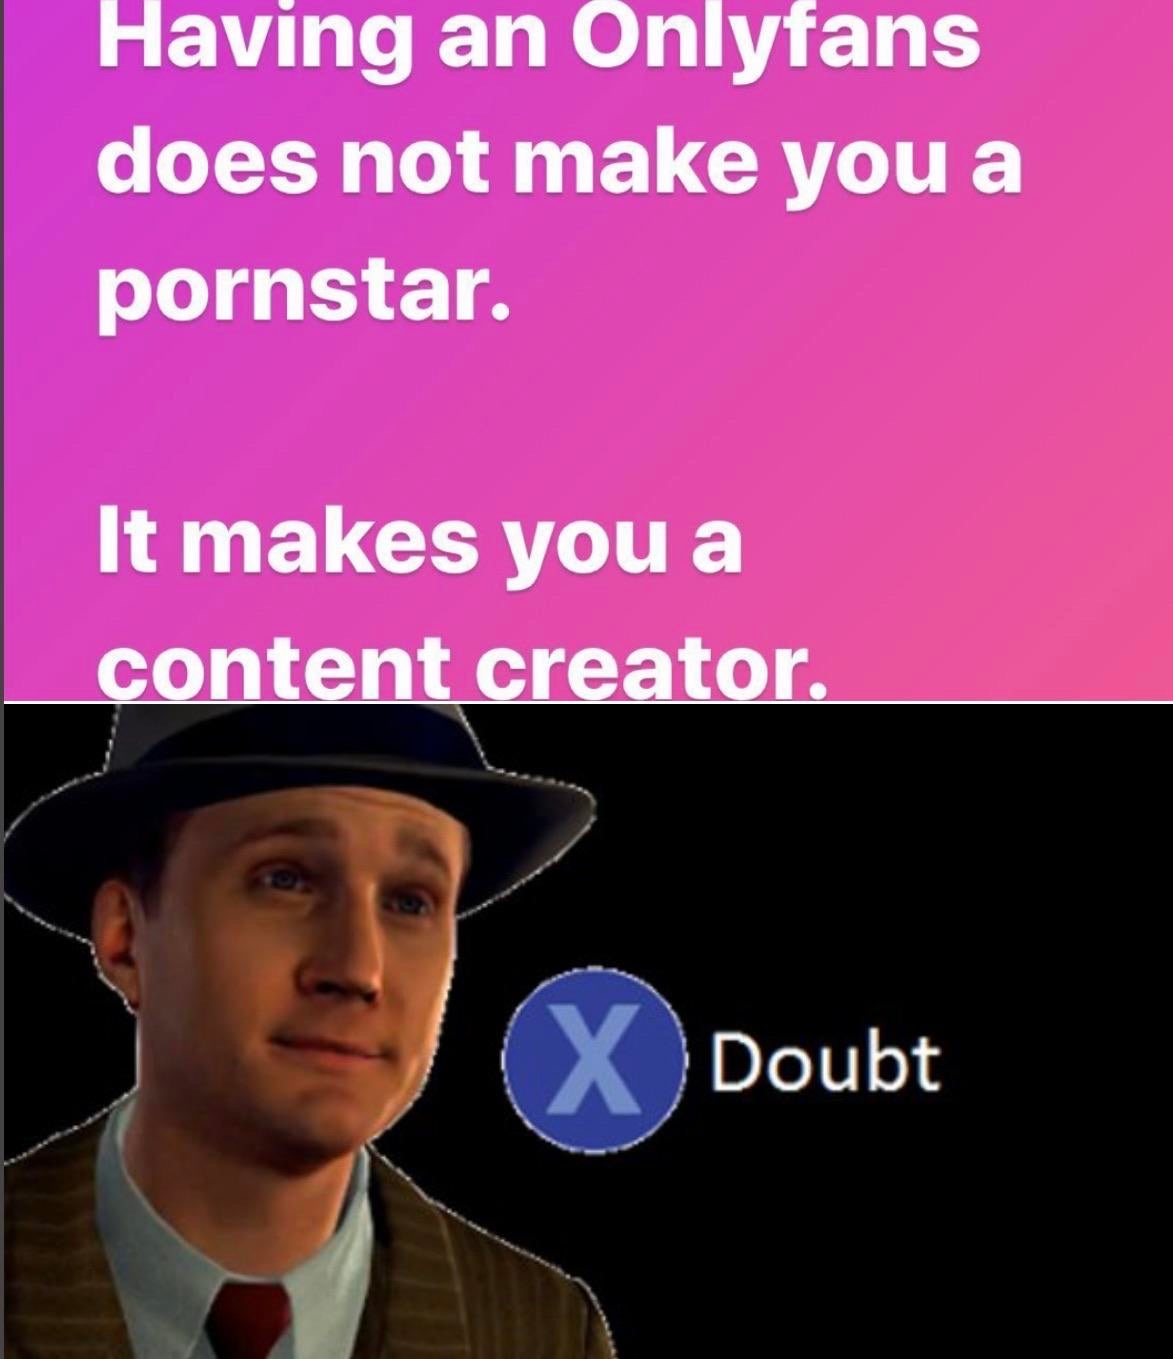 cole phelps - Having an Onlyfans does not make you a pornstar. It makes you a content creator. X Doubt